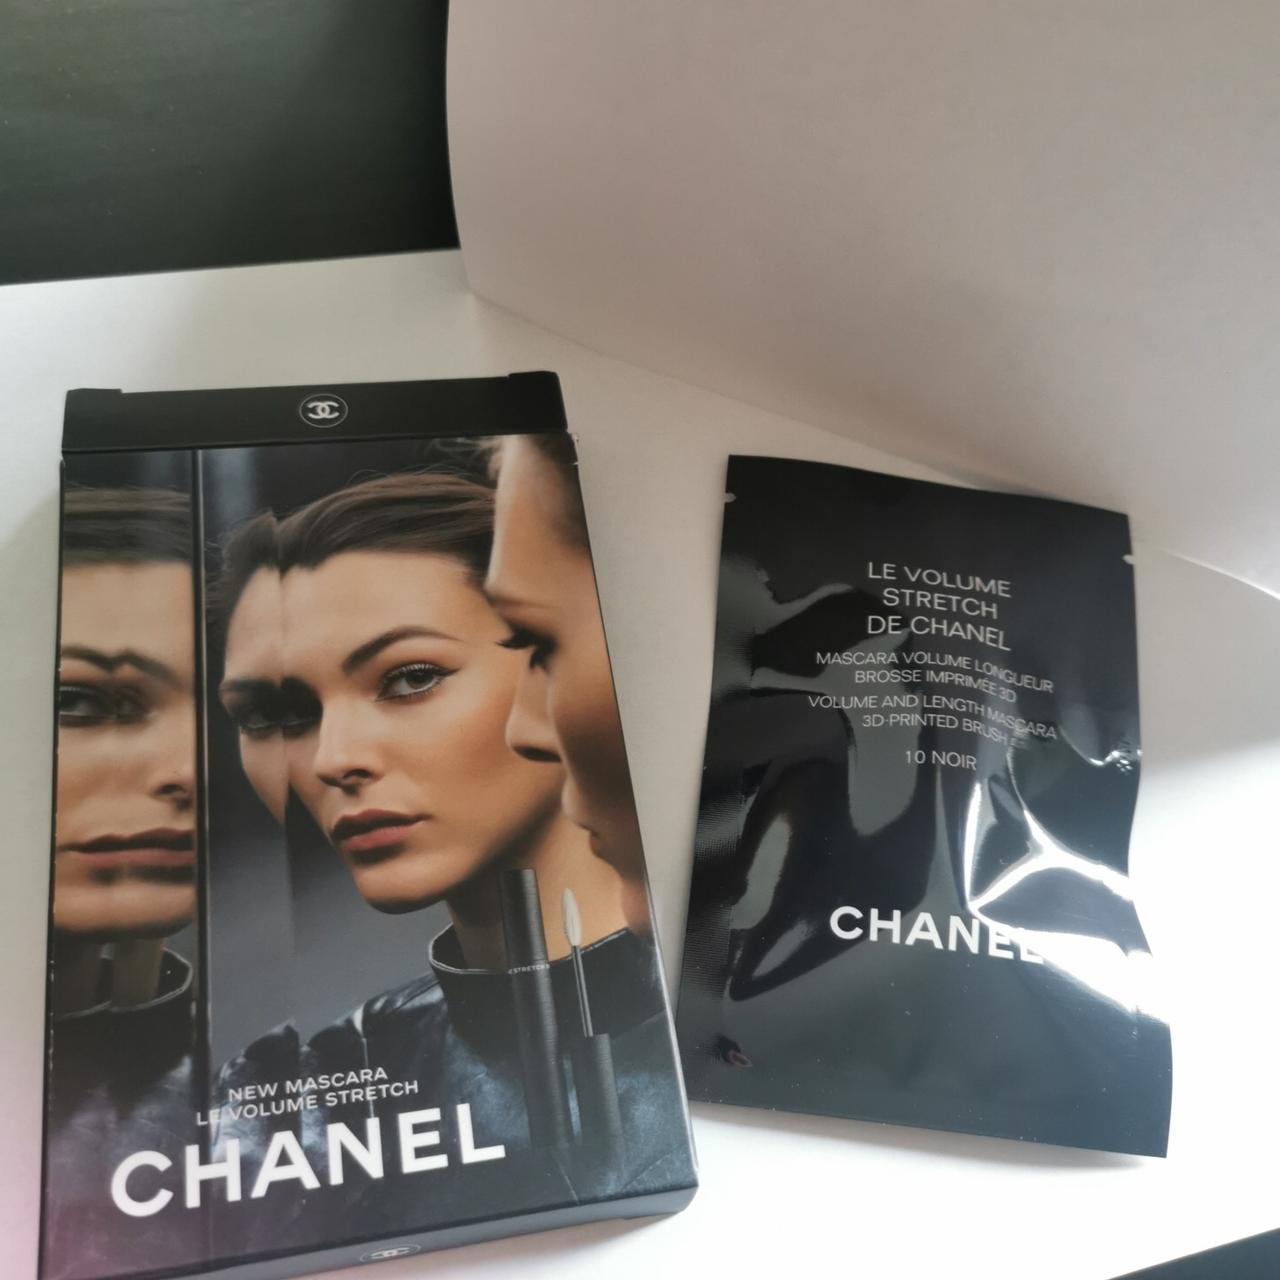 2 X Chanel new mascara le volume stretch New and - Depop